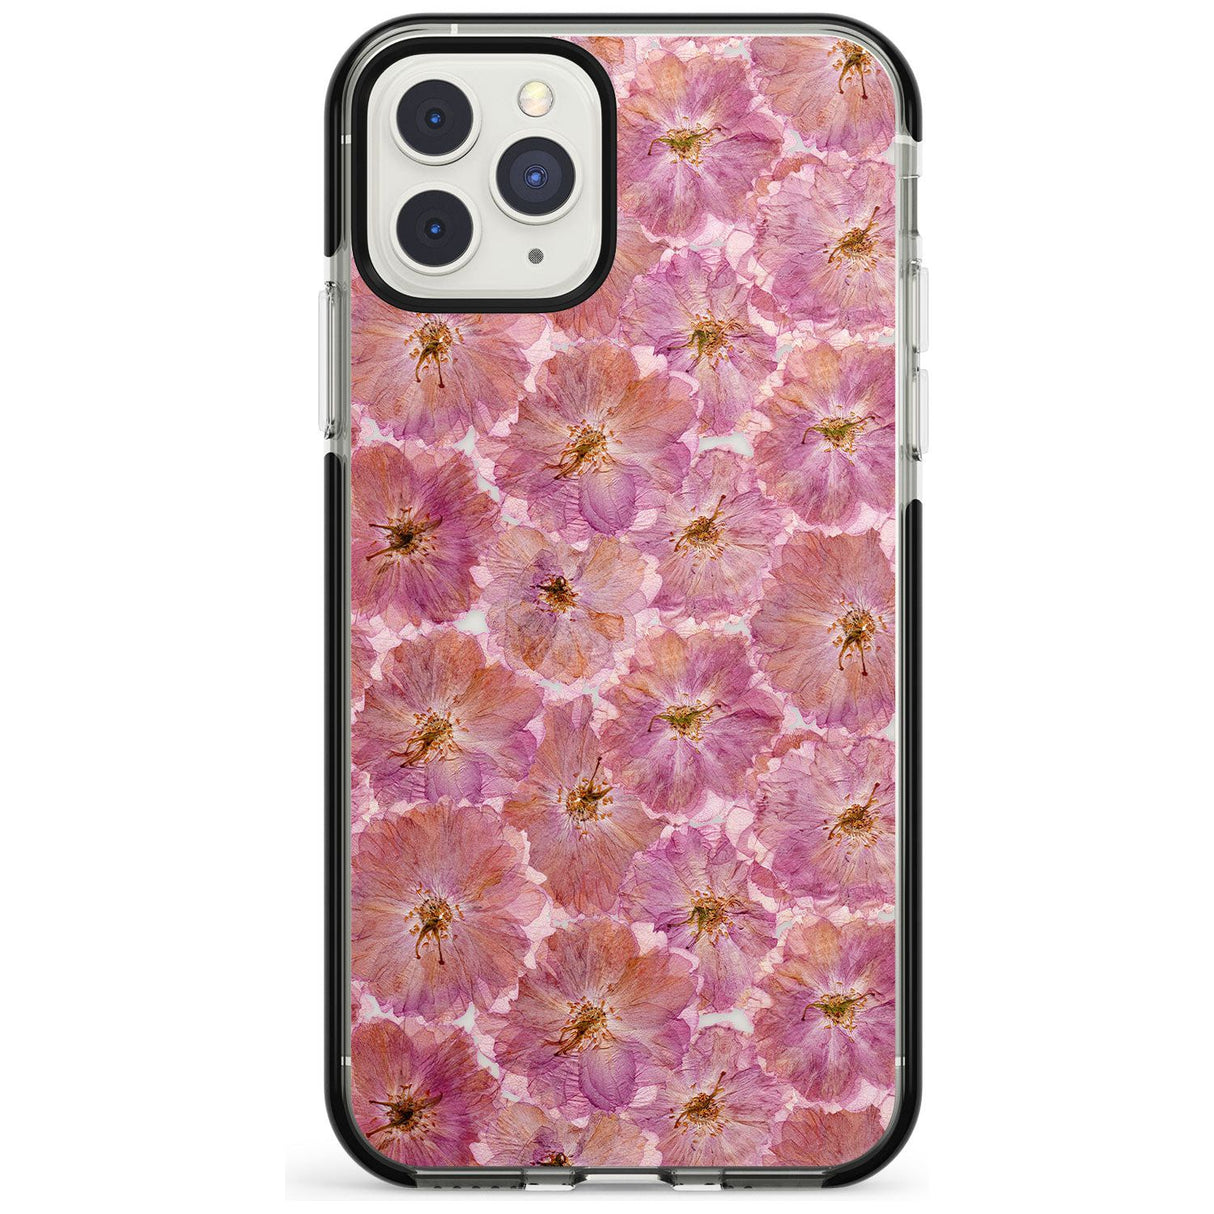 Large Pink Flowers Transparent Design Black Impact Phone Case for iPhone 11 Pro Max